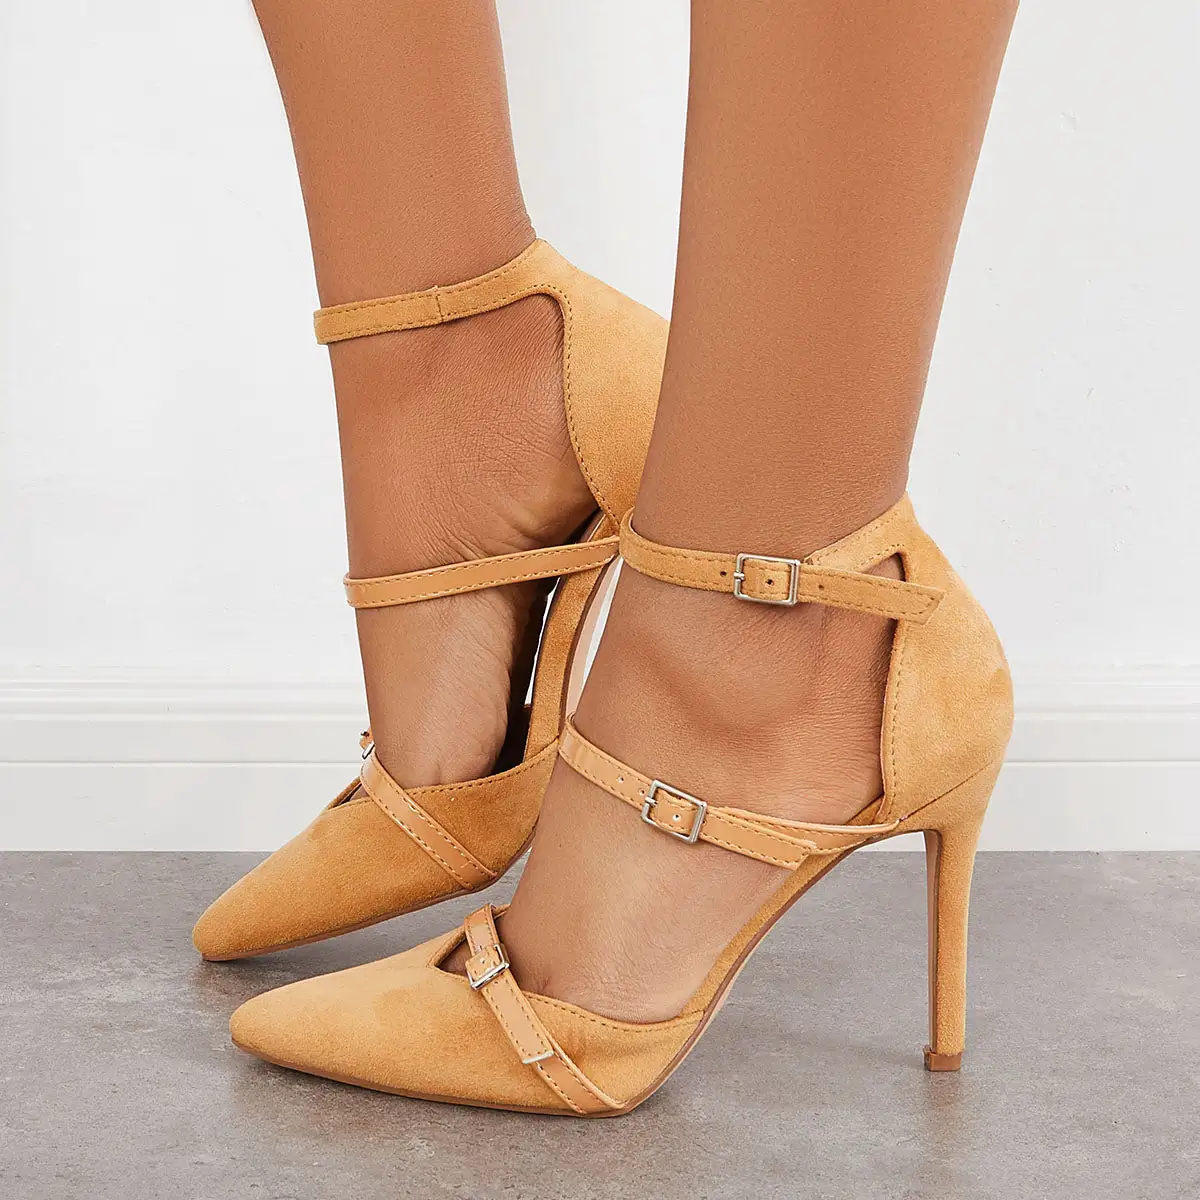 Chic Pointed Toe Stiletto High Heels Ankle Strap Pumps